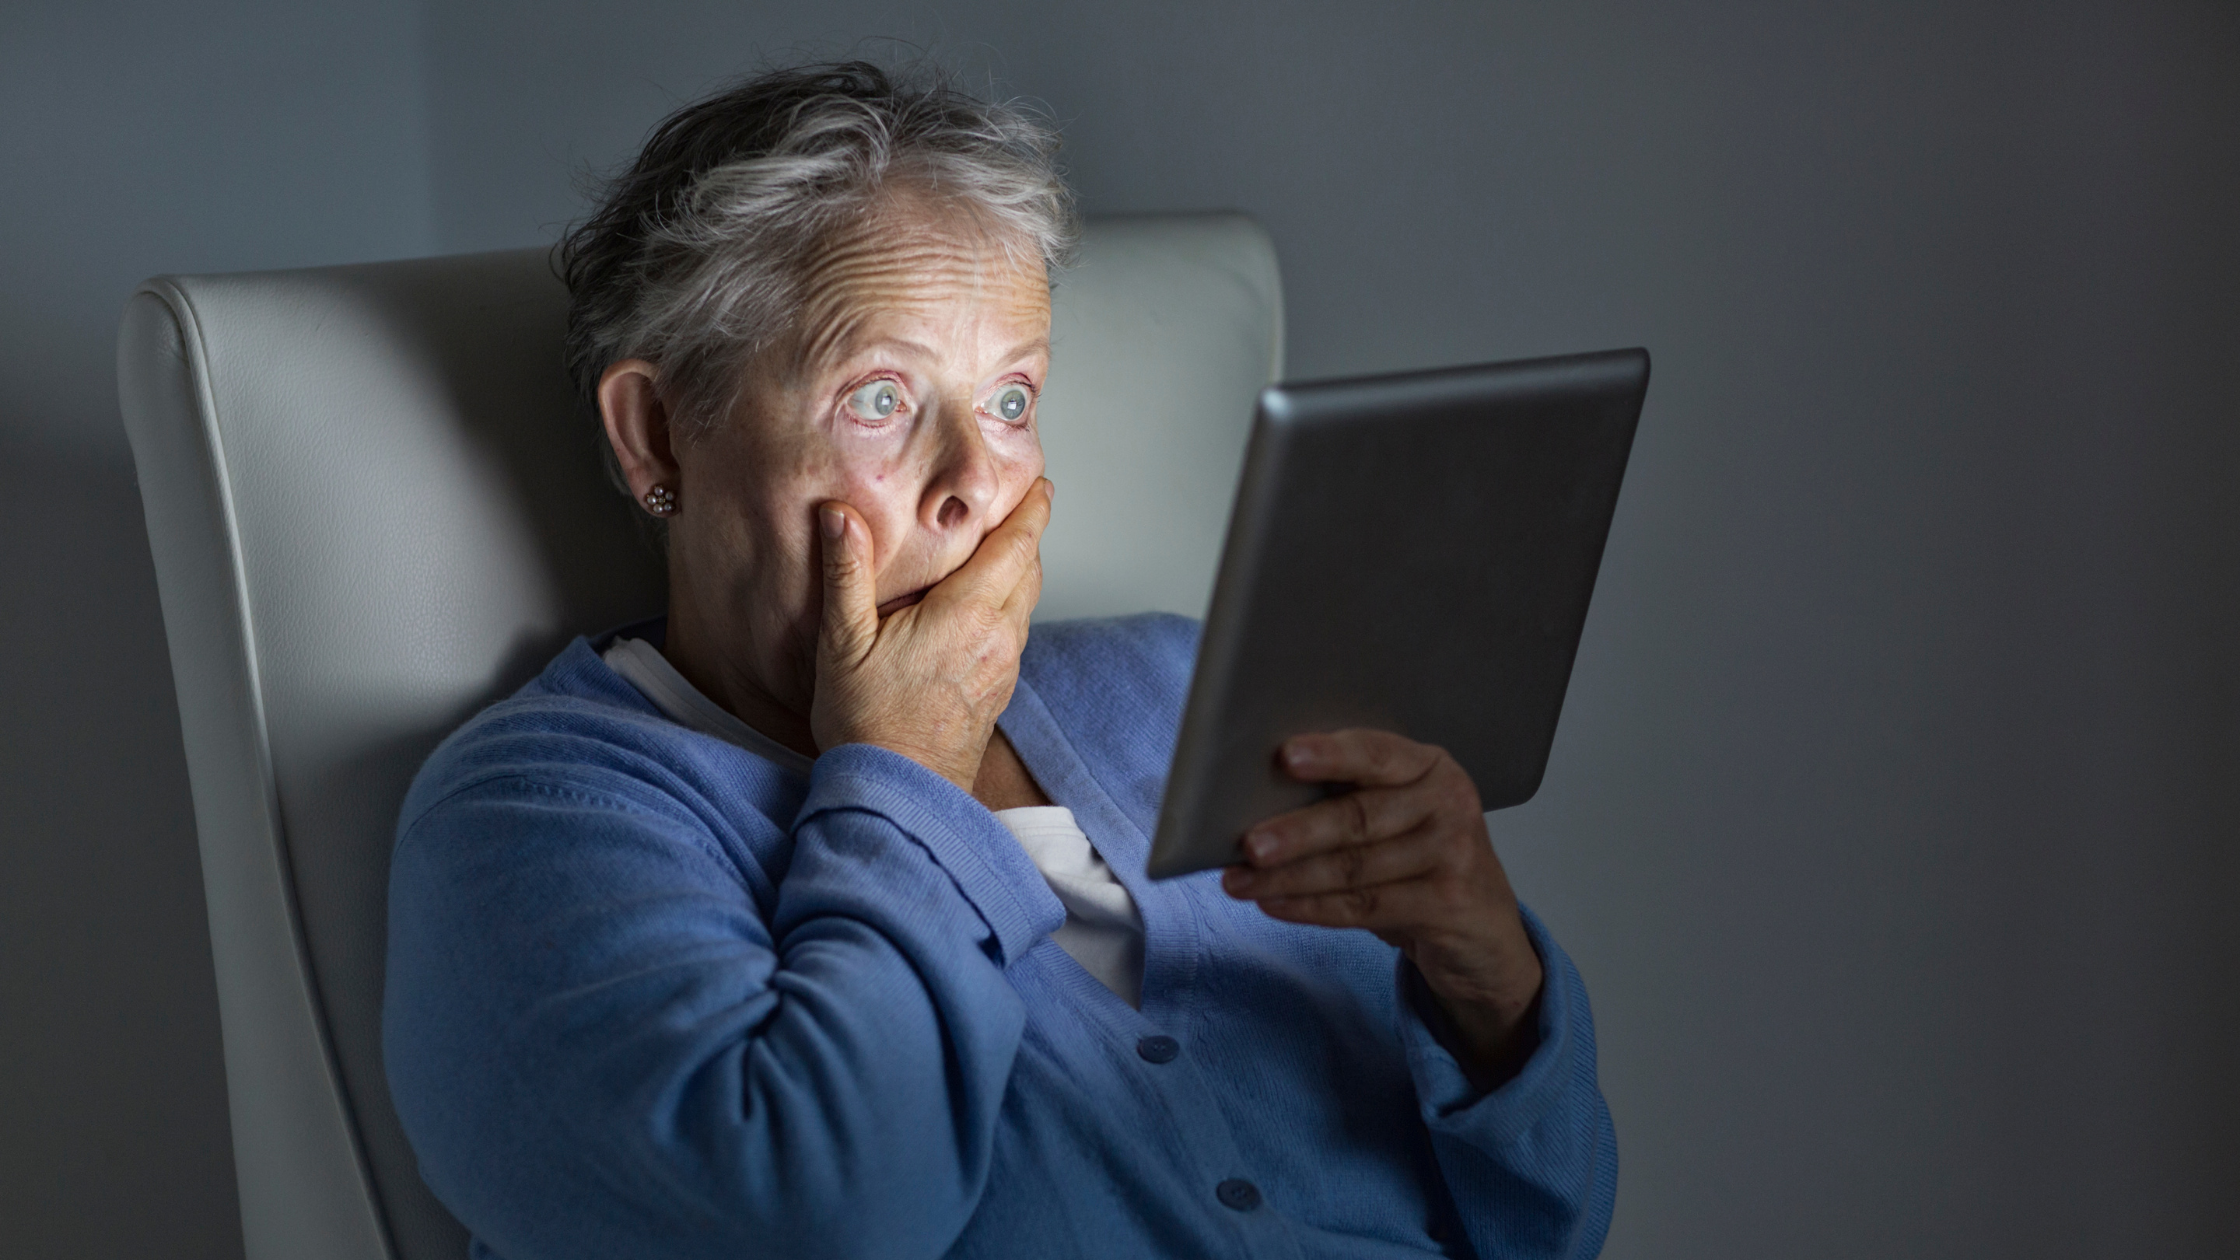 Older lady is surprised at something she is looking at on a tablet, her hand over her mouth